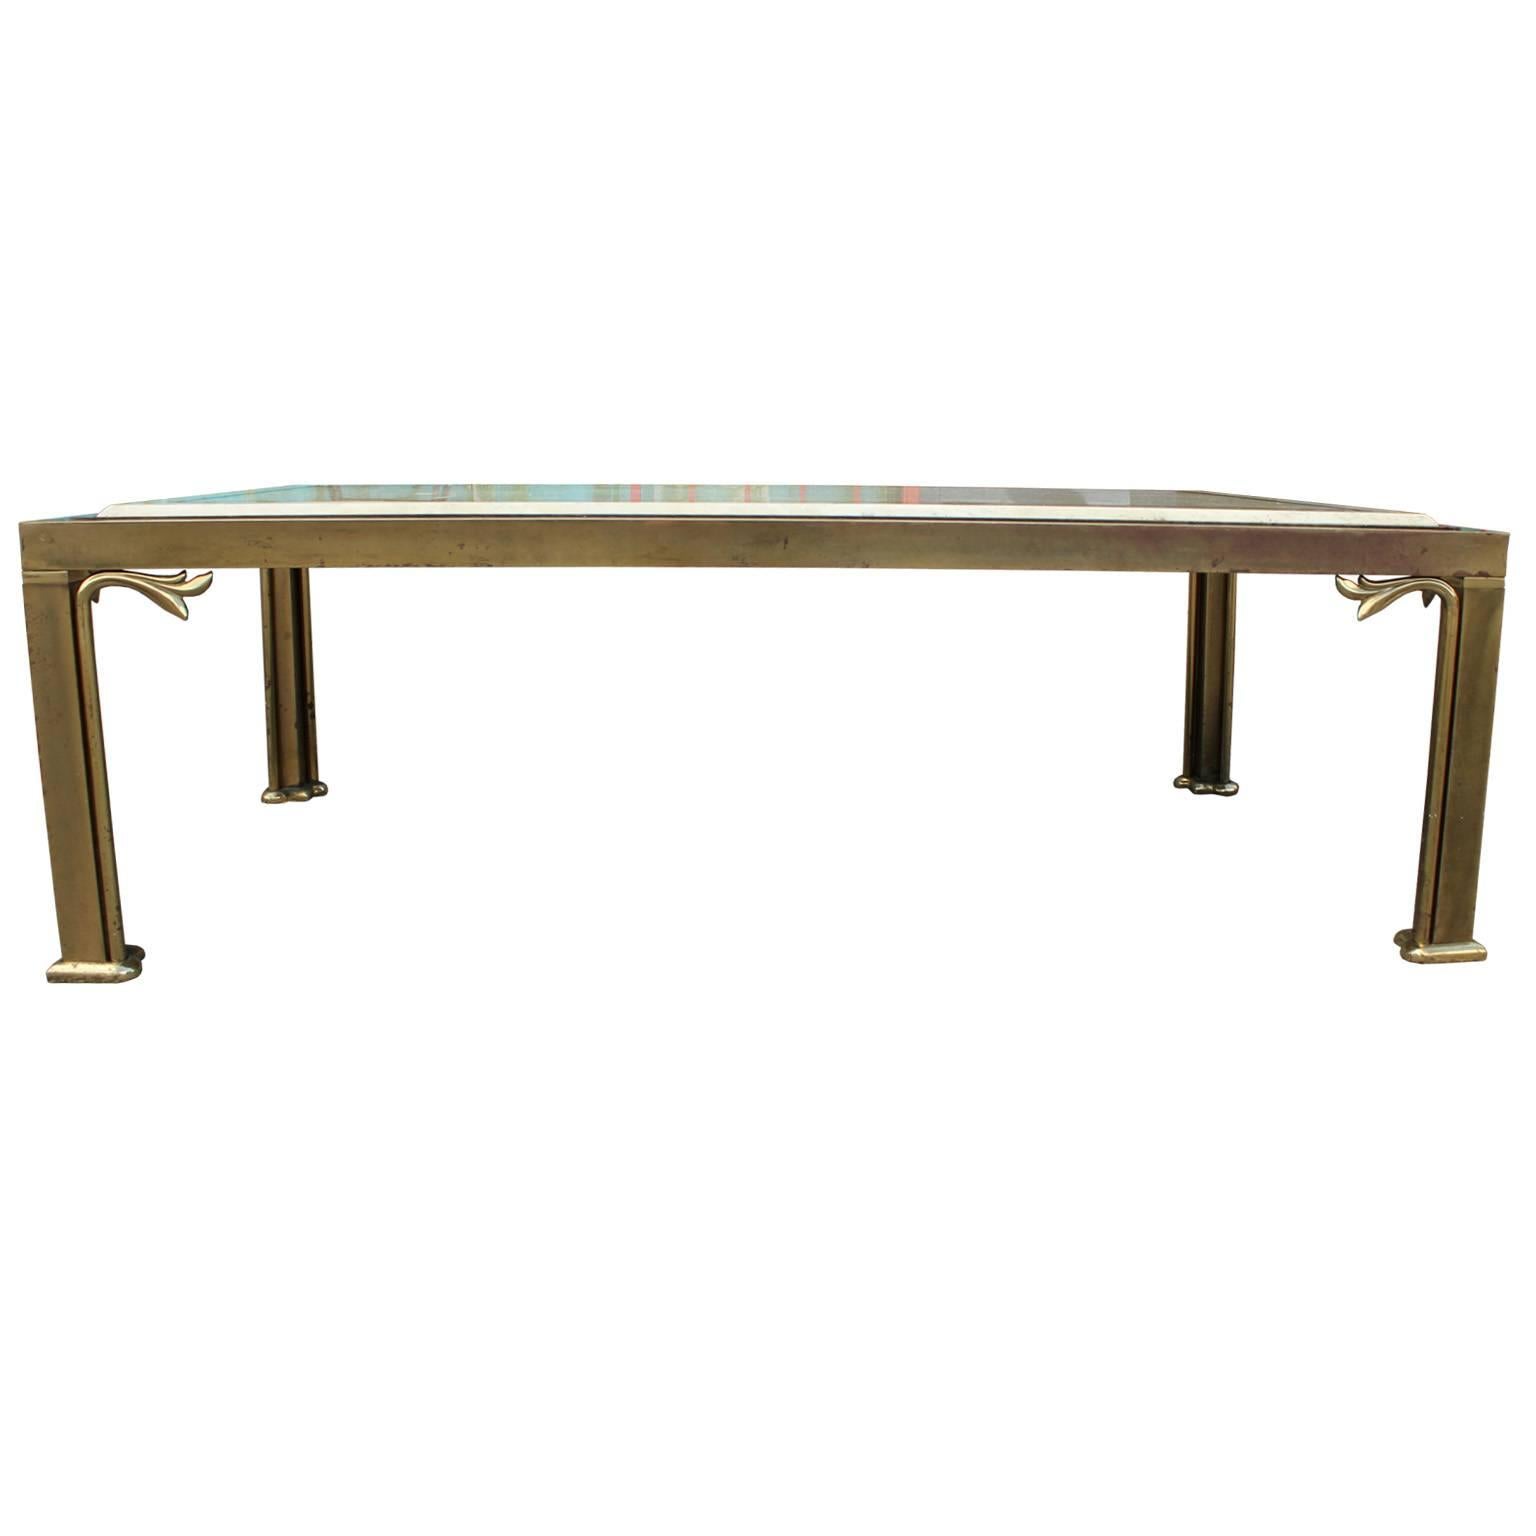 Elegant travertine topped coffee table. Brass table base has a clean feel with unexpected detailing. Travertine marble-top has an inlay detail. Perfect in a Hollywood Regency, transitional or modern space. Brass has a heavy patina.